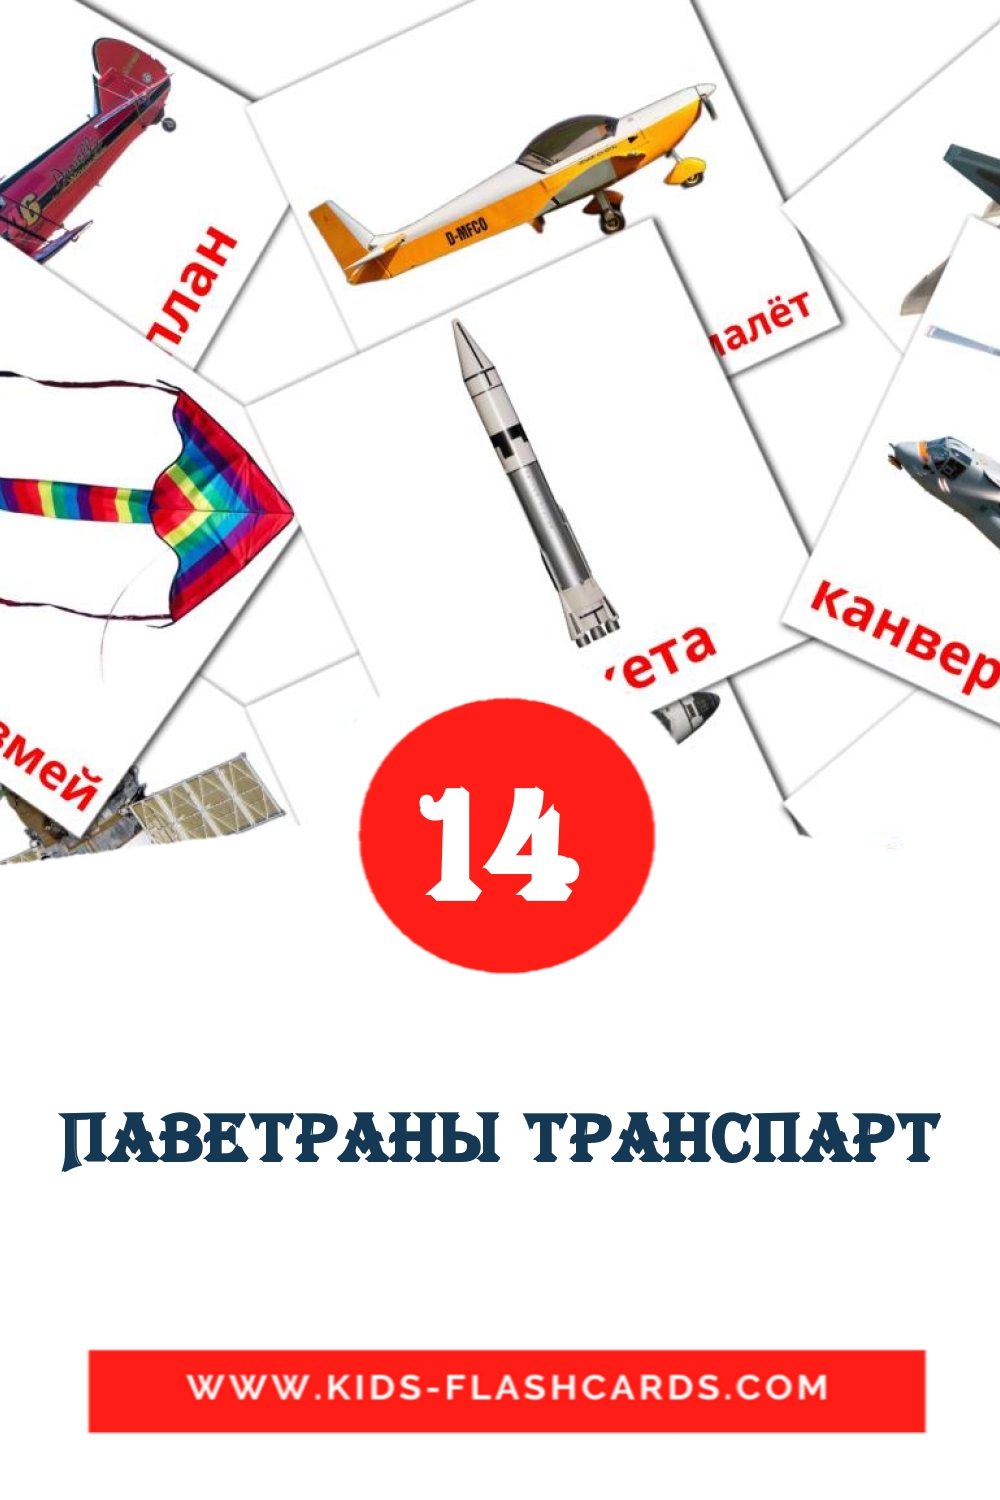 14 Паветраны транспарт Picture Cards for Kindergarden in belarusian